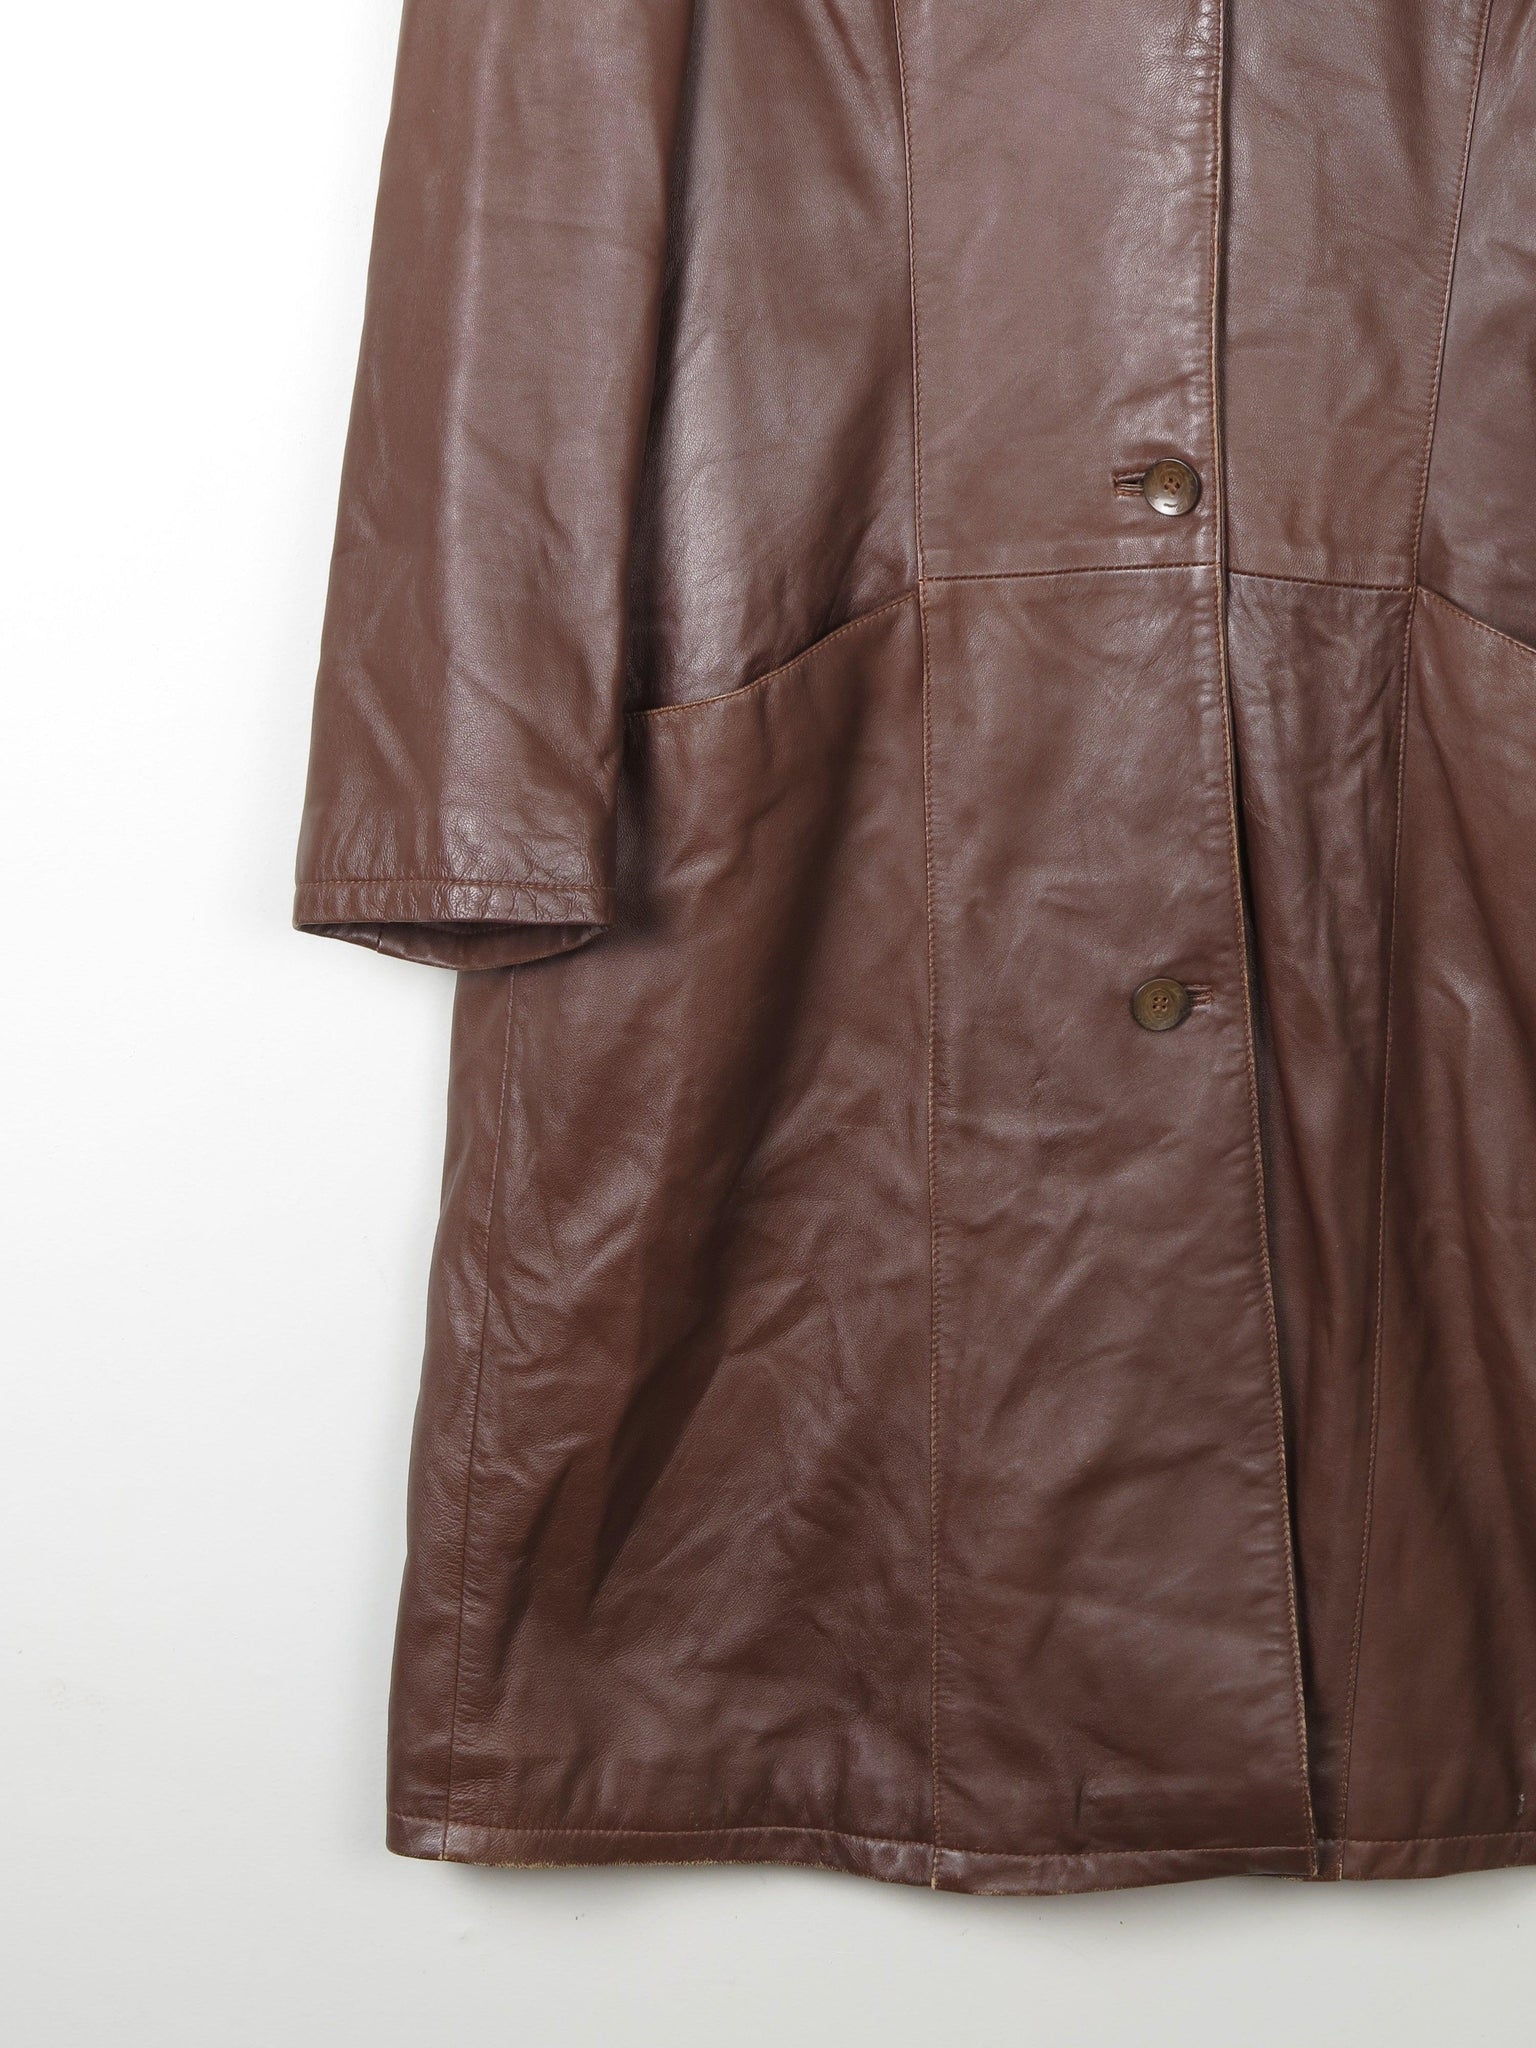 Women's Tan/Brown Soft Leather Coat L - The Harlequin